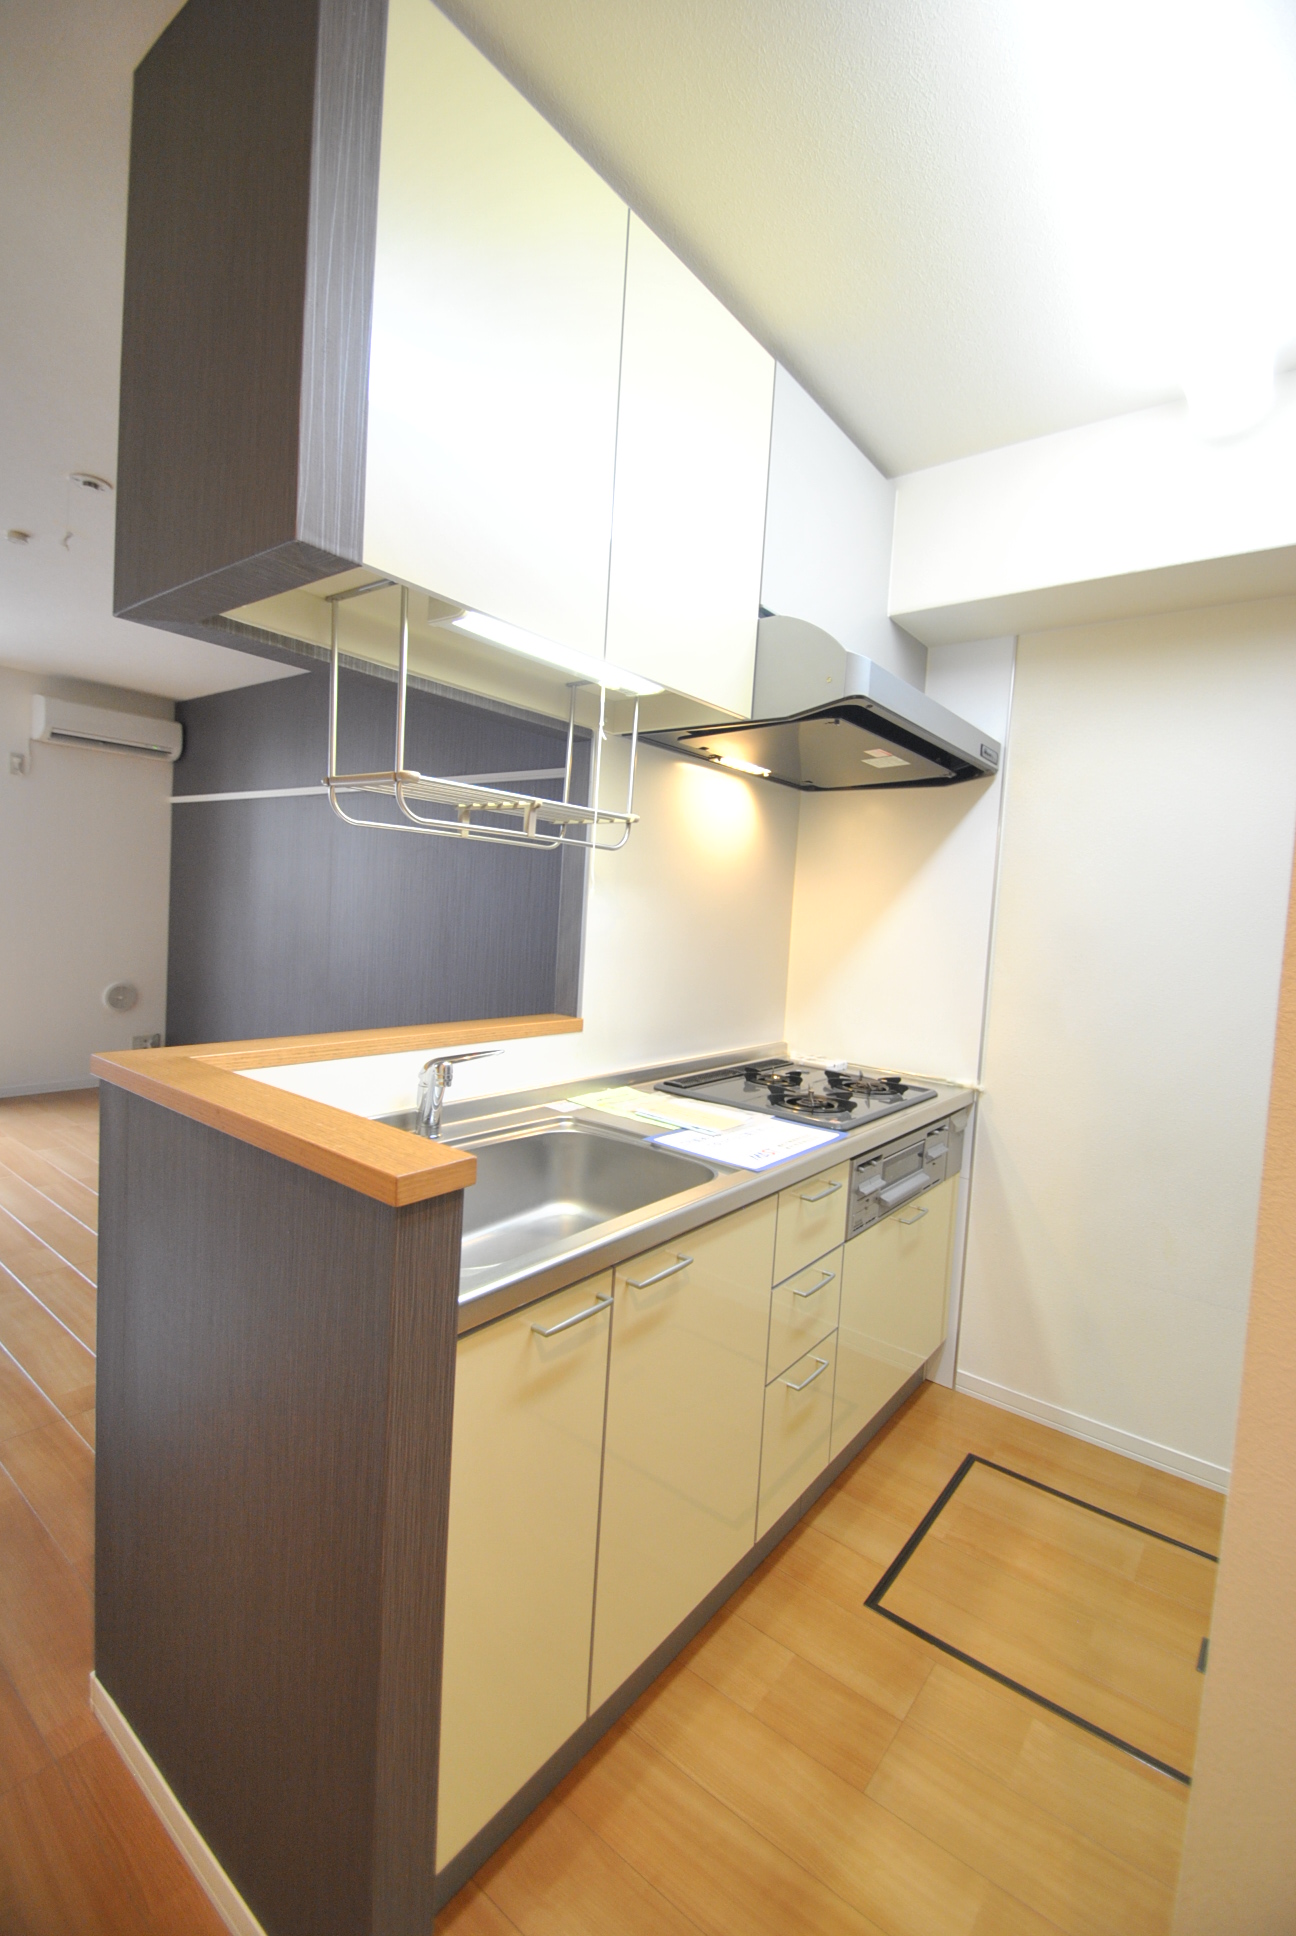 Kitchen. You can also enjoy dishes in the 3-burner stove with system Kitchen